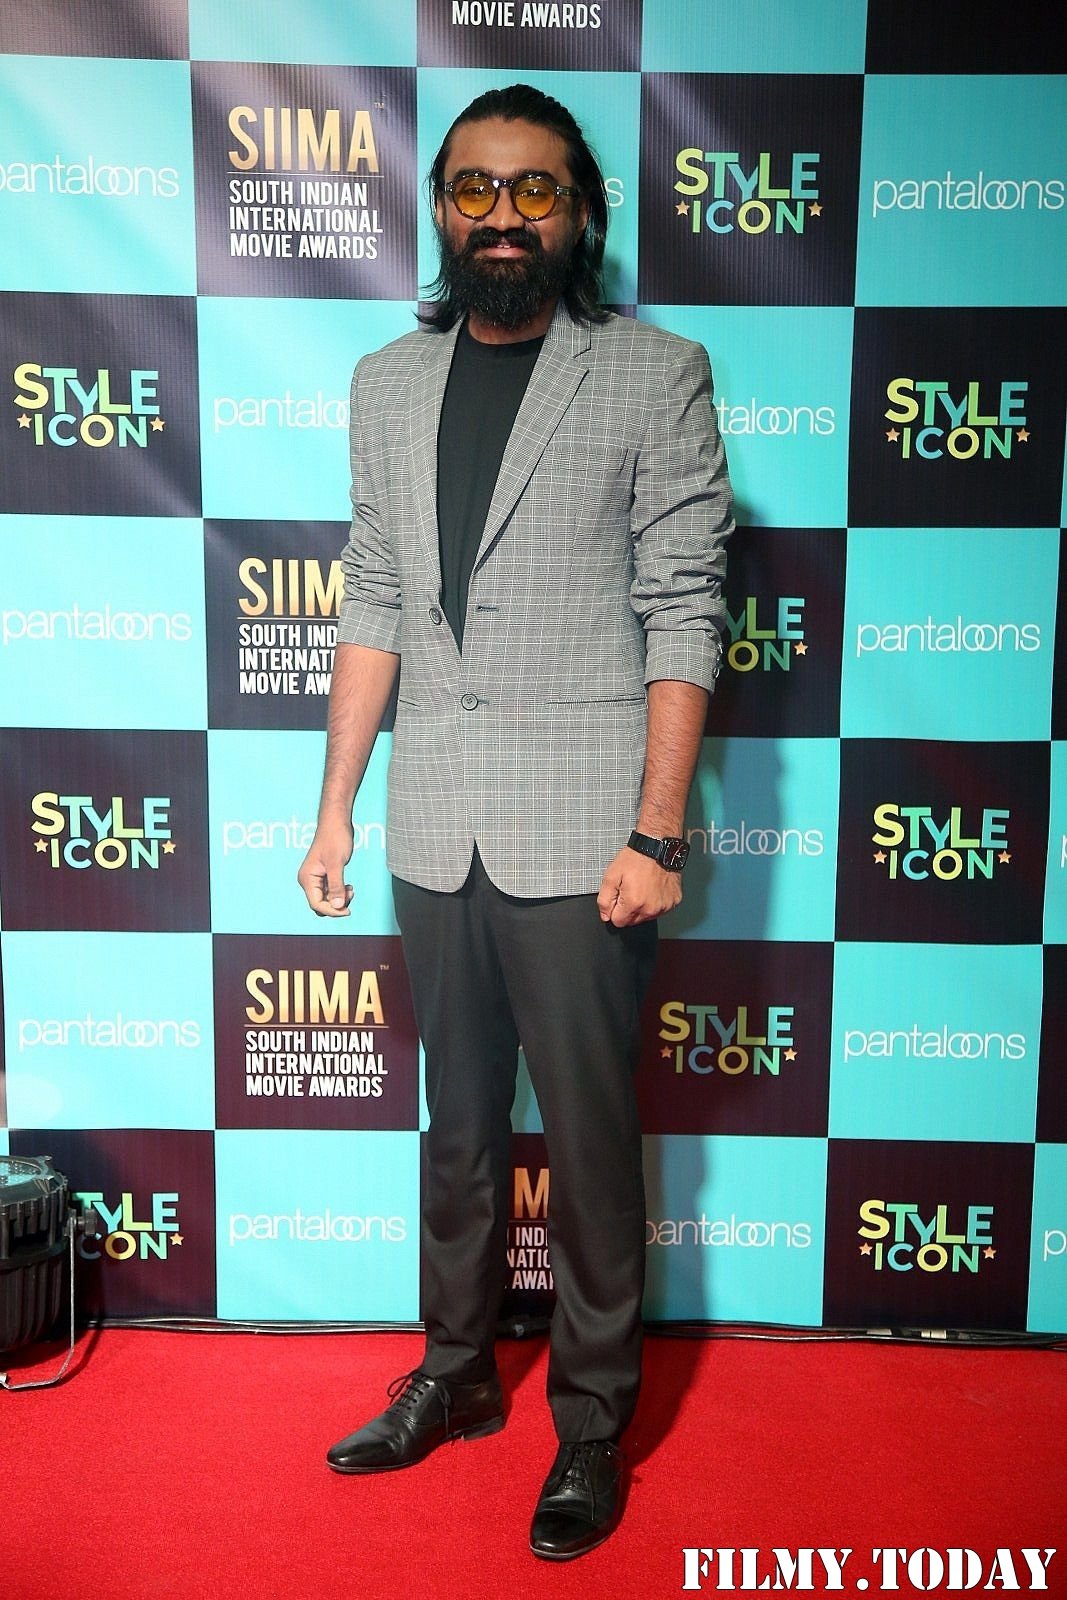 SIIMA Awards 2019 Photos | Picture 1675501